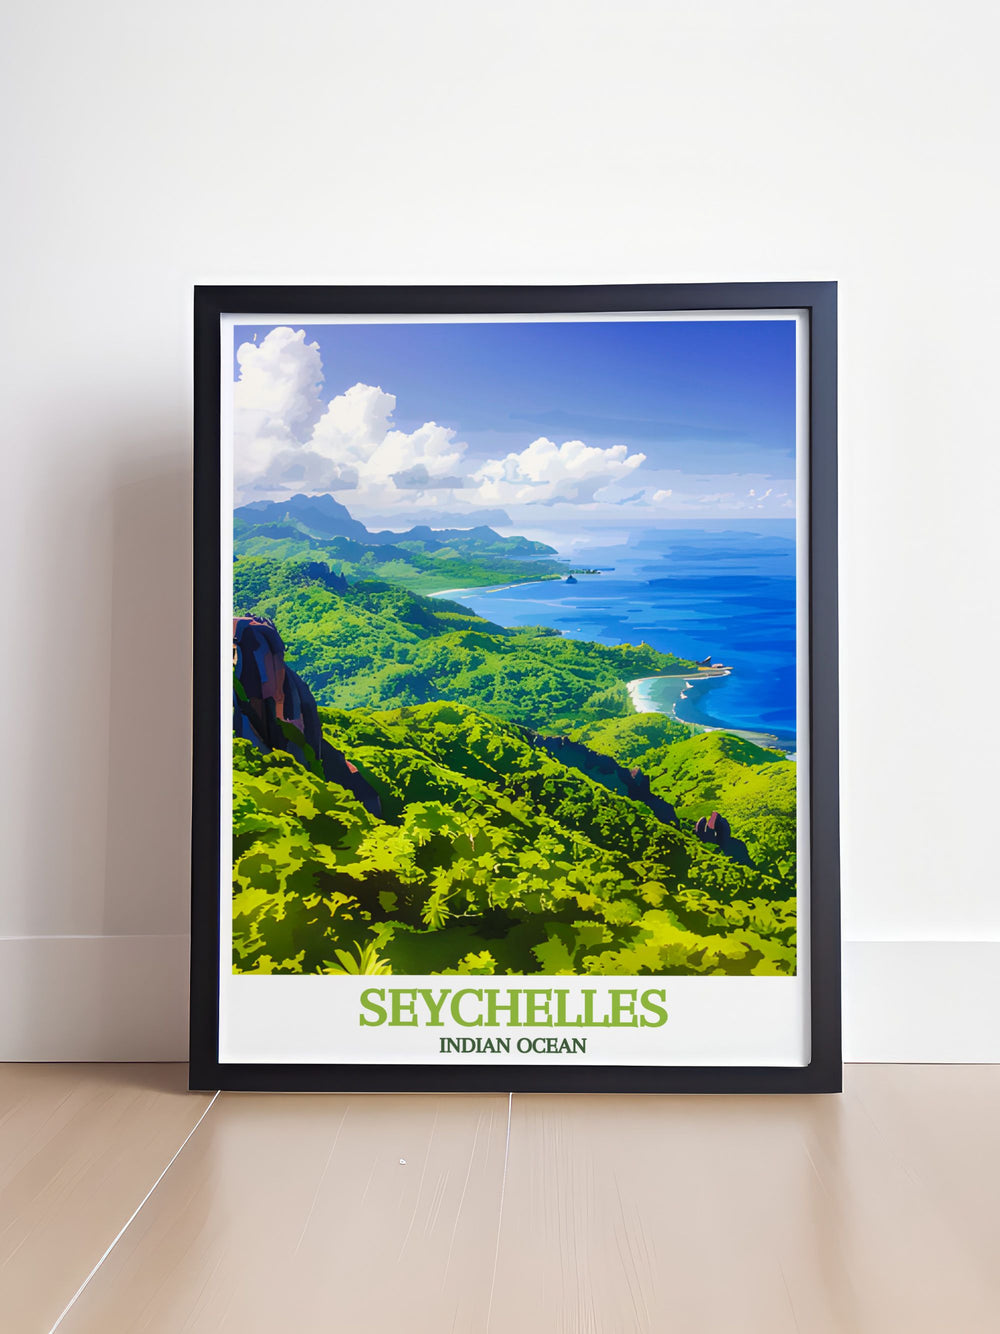 Vallée de Mai and the stunning Indian Ocean are beautifully depicted in this poster, celebrating the iconic forest and vibrant marine life of Seychelles, perfect for travel enthusiasts.